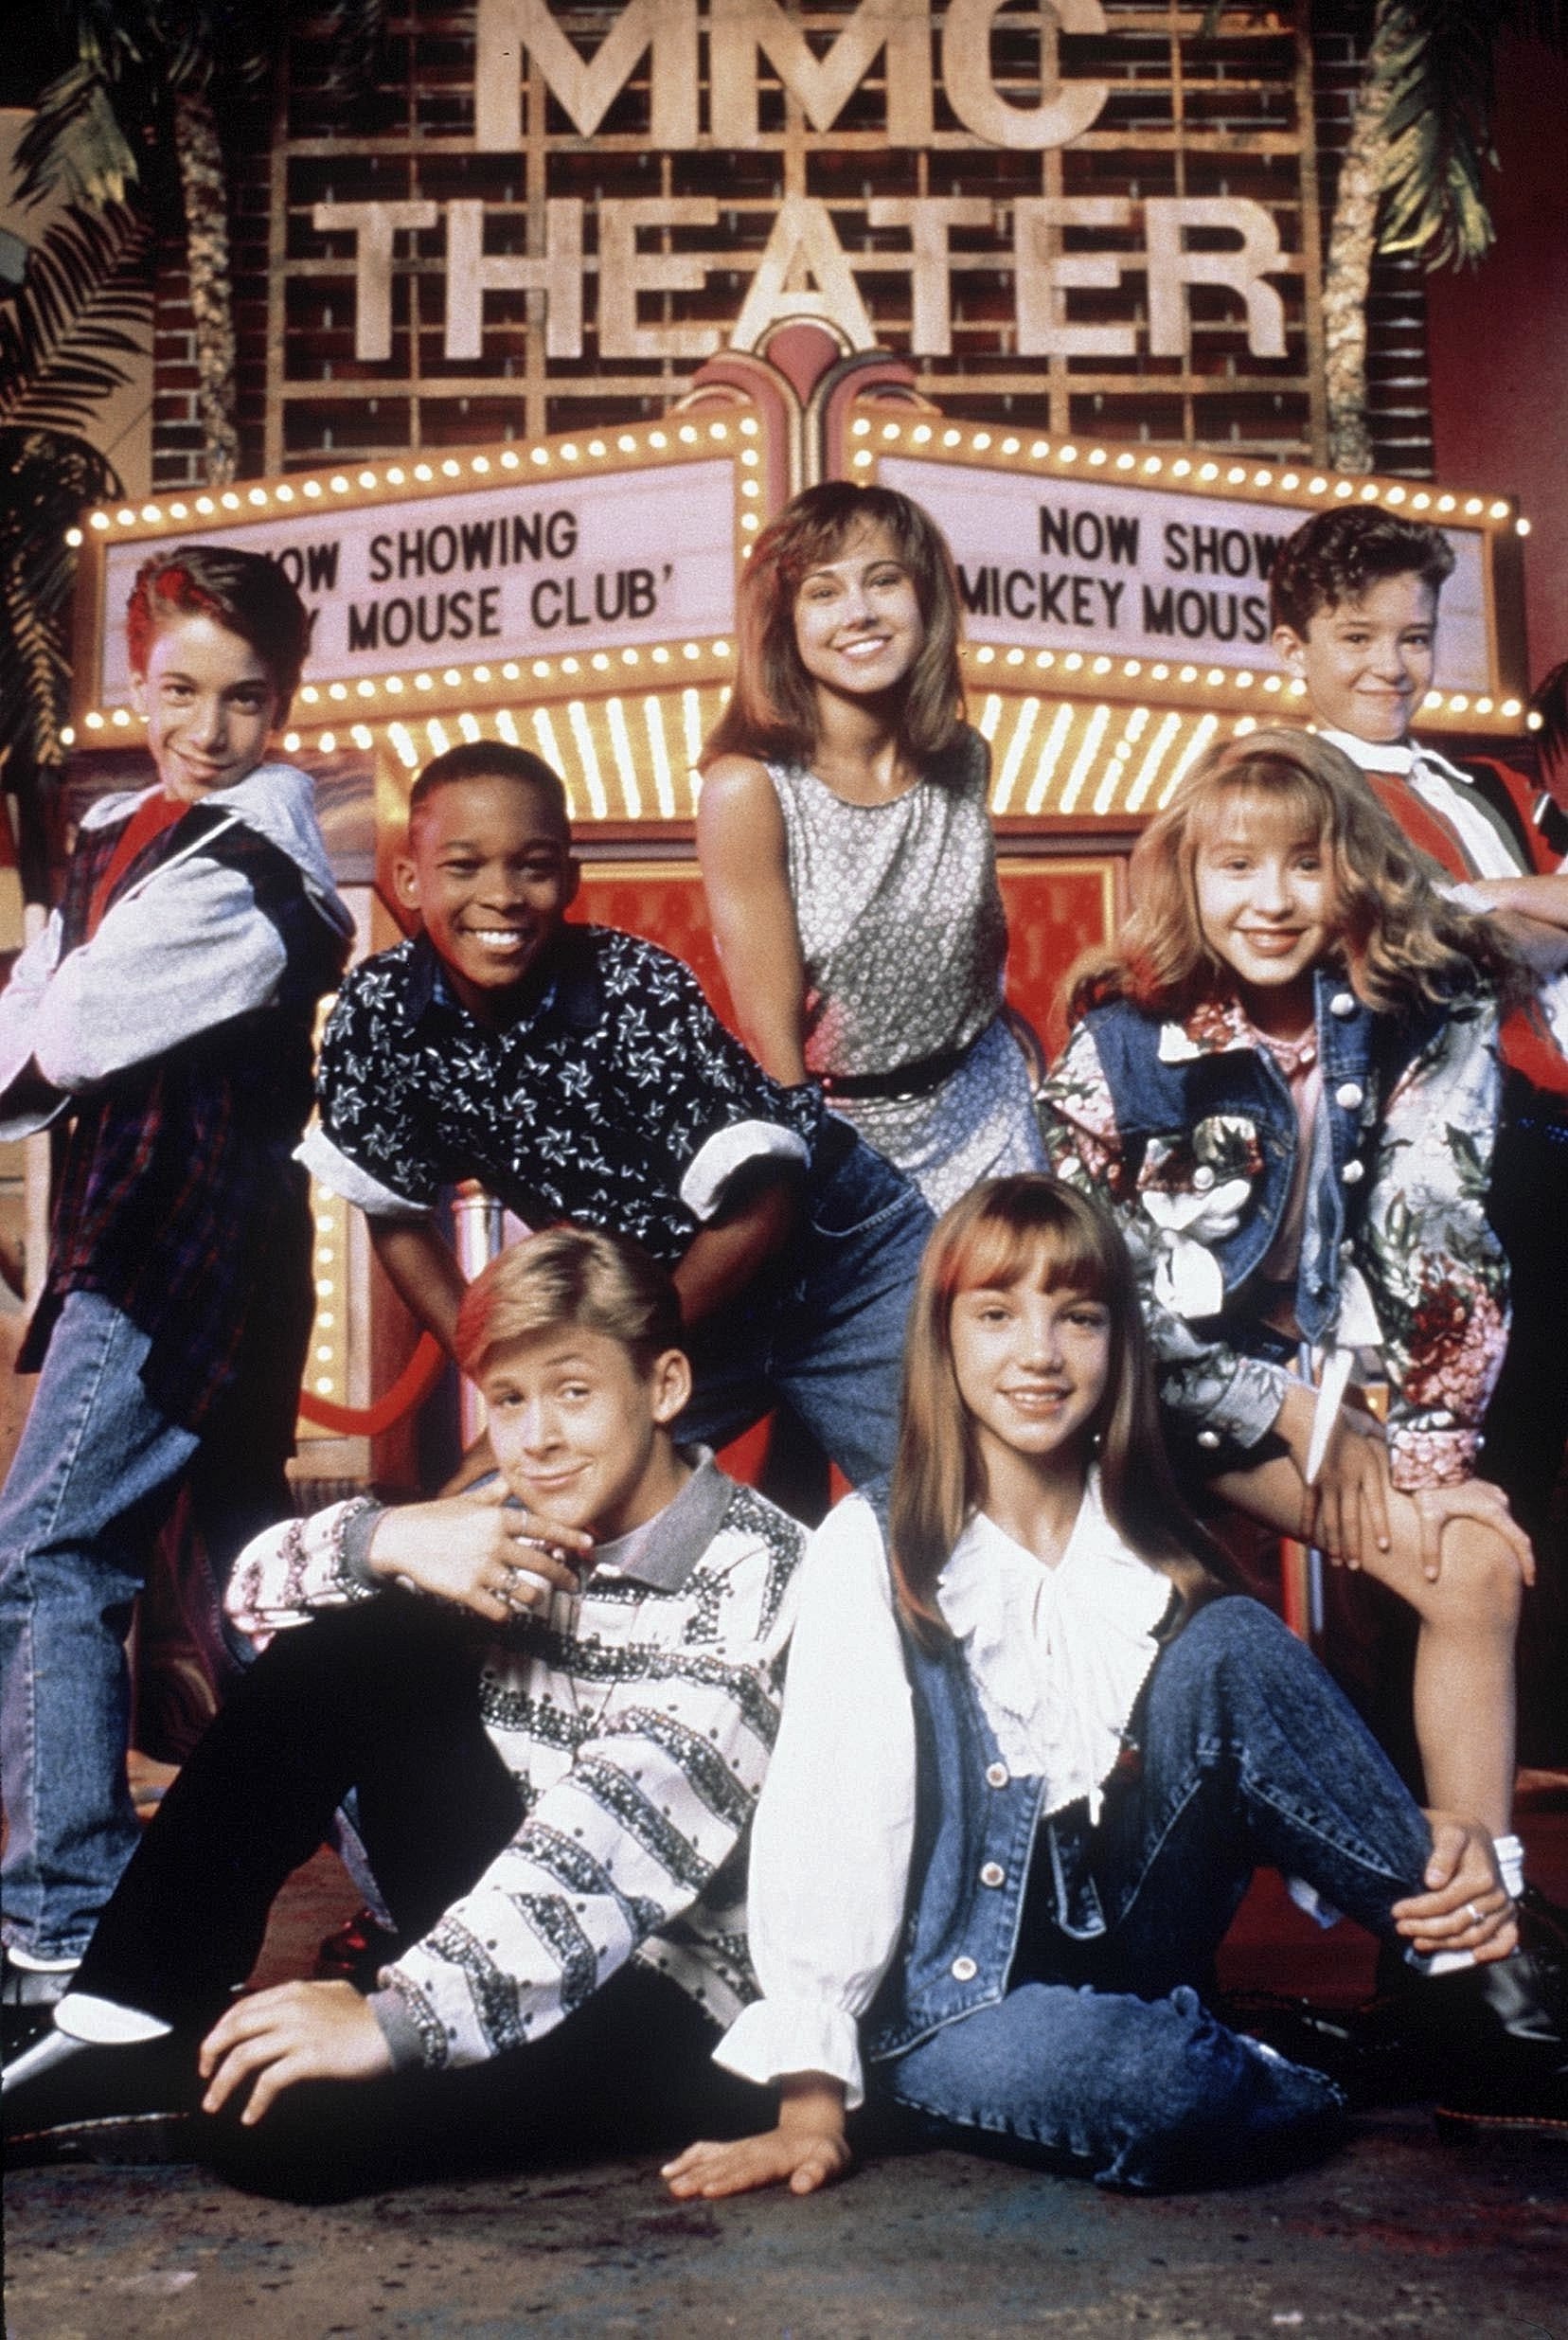 Britney Spears, Ryan Gosling have 'Mickey Mouse Club' reunion on 'Ellen'